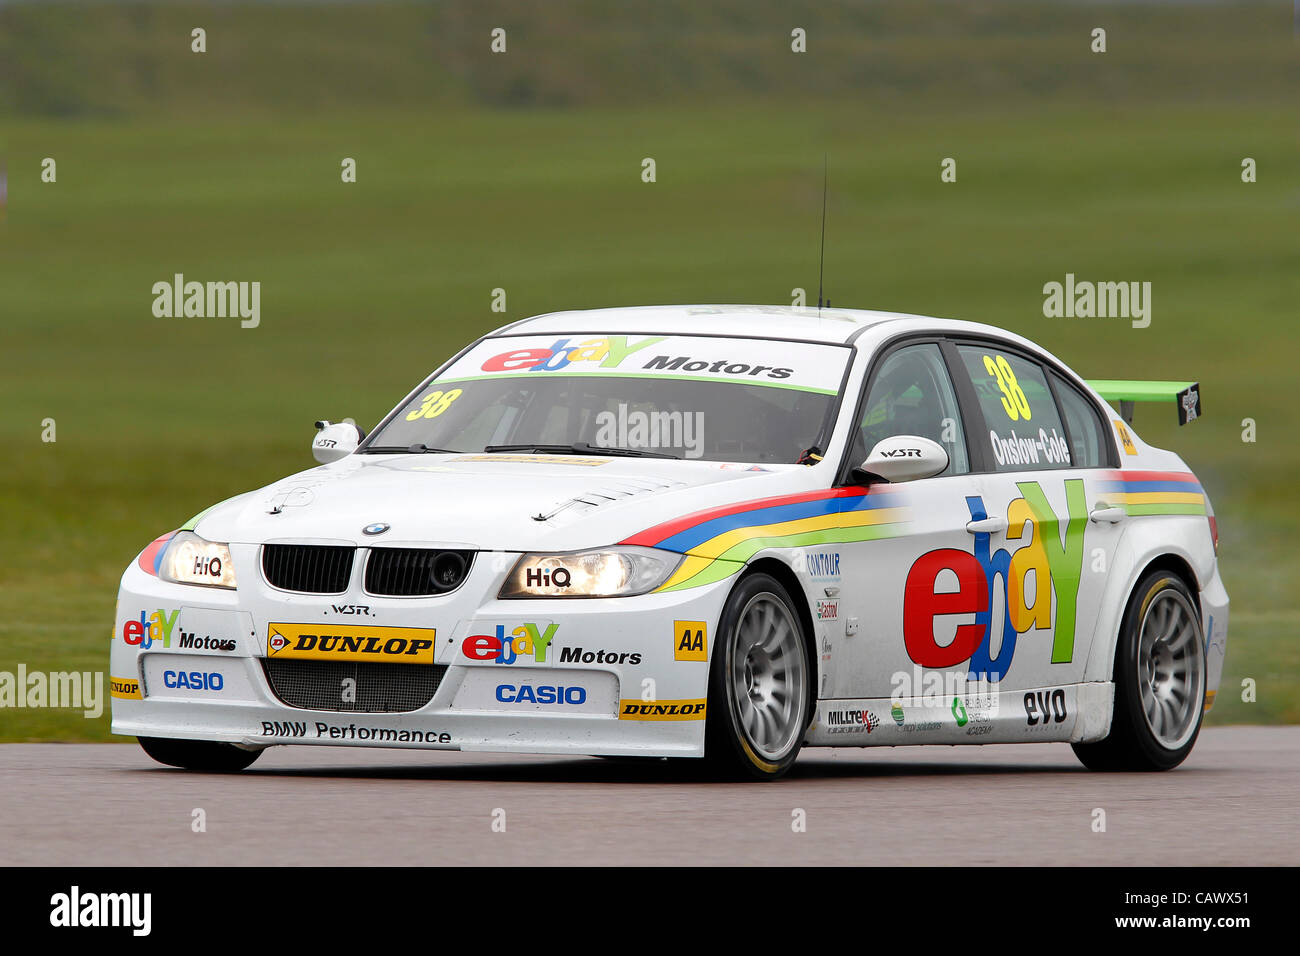 2.04.2012 Thruxton,  in action during Saturday's wet  qualifying in the 2012 British Touring Car Championship. Stock Photo